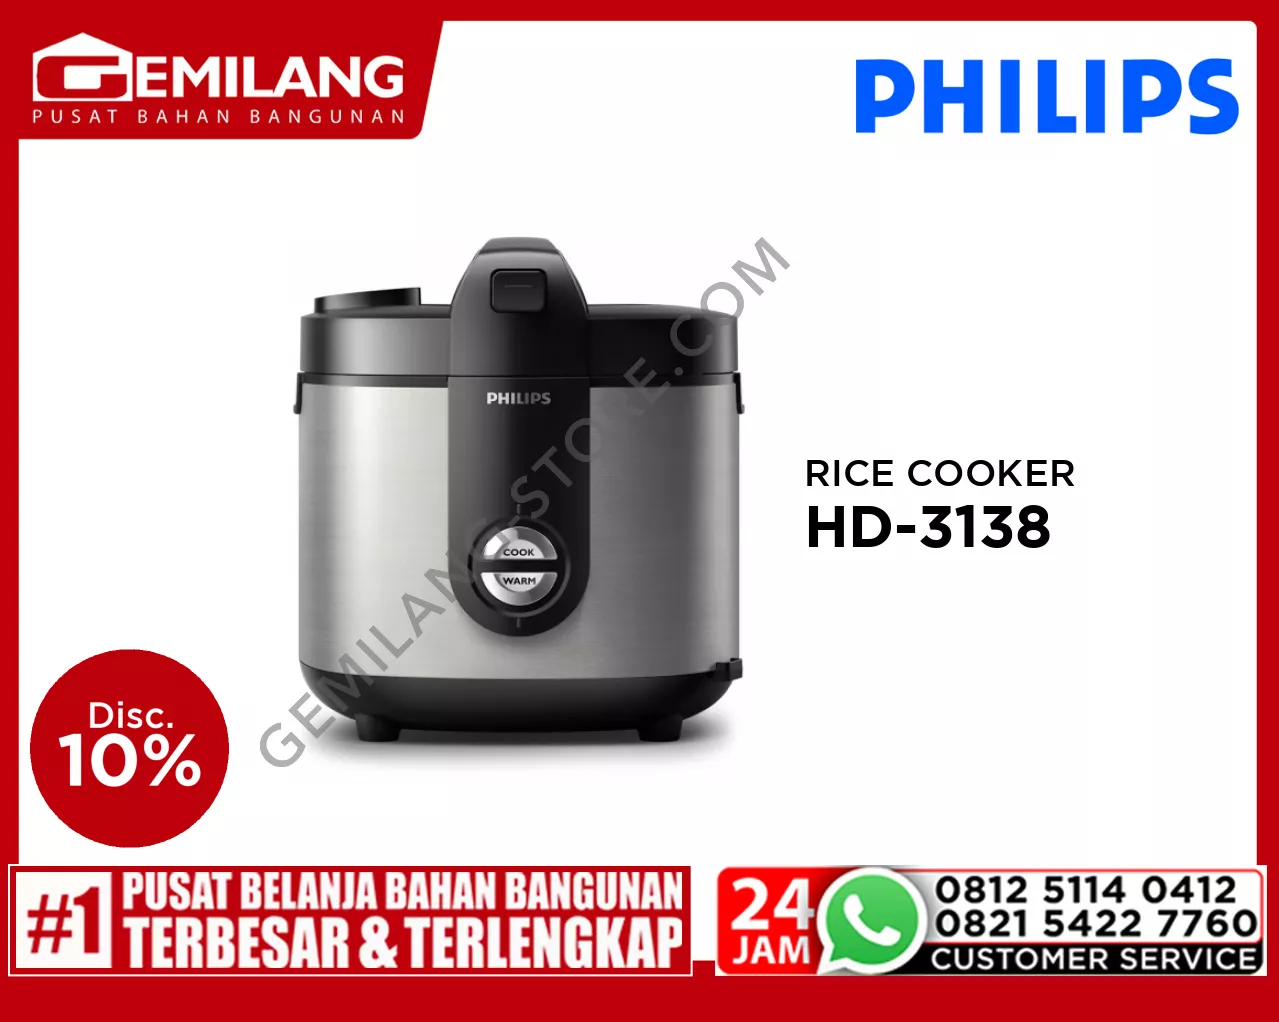 PHILIPS RICE COOKER HD-3138